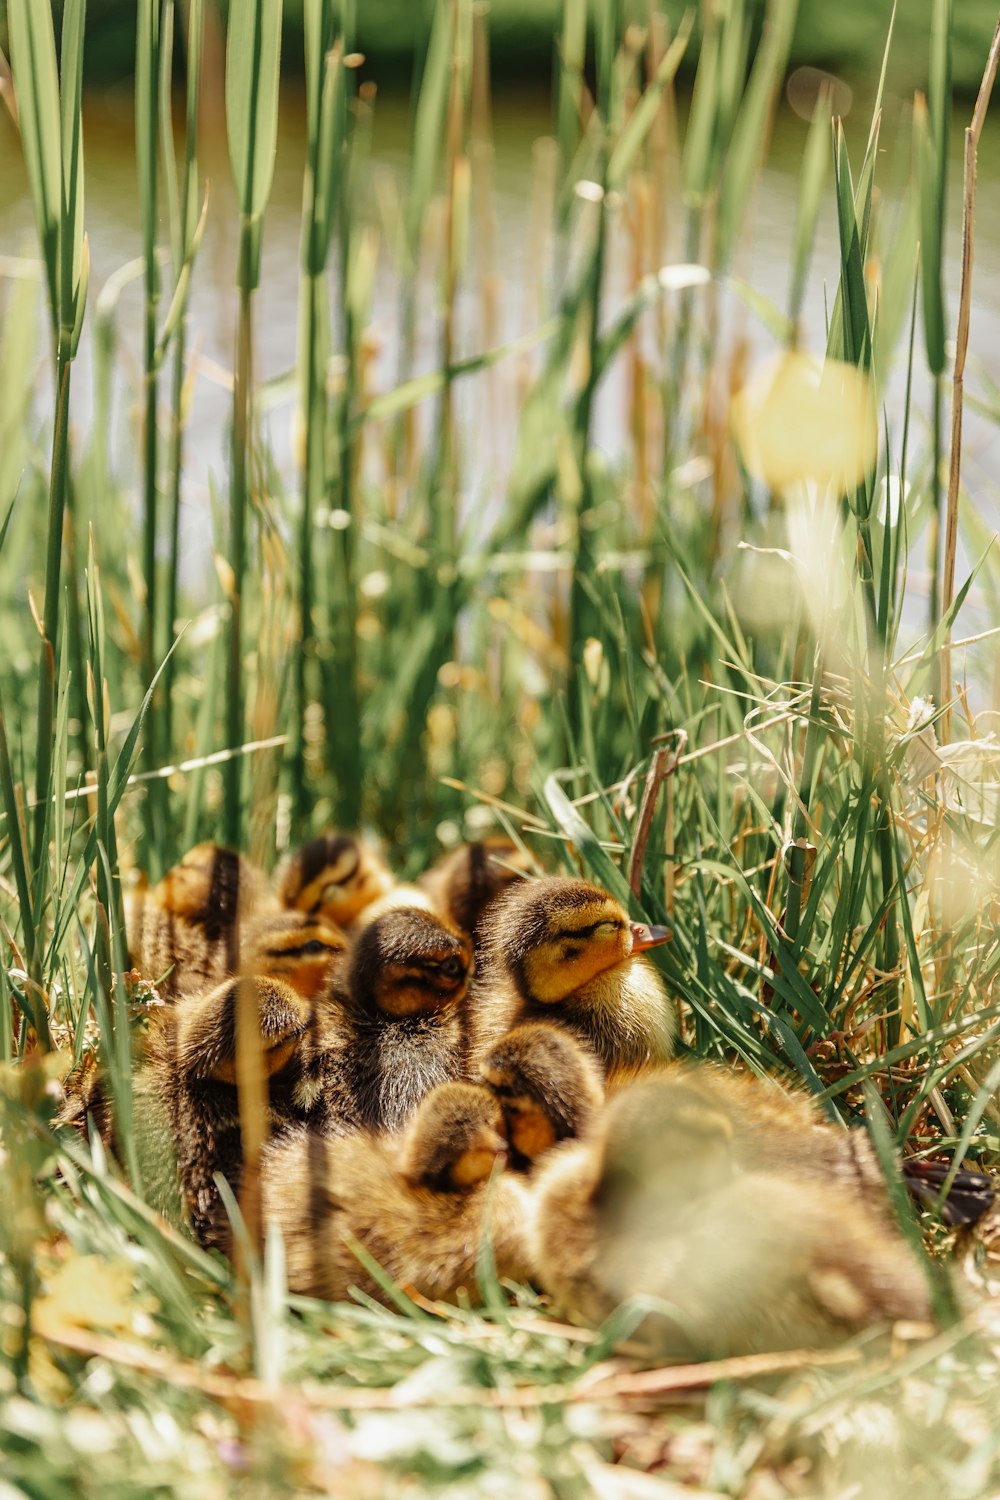 a group of baby ducks sitting in the grass